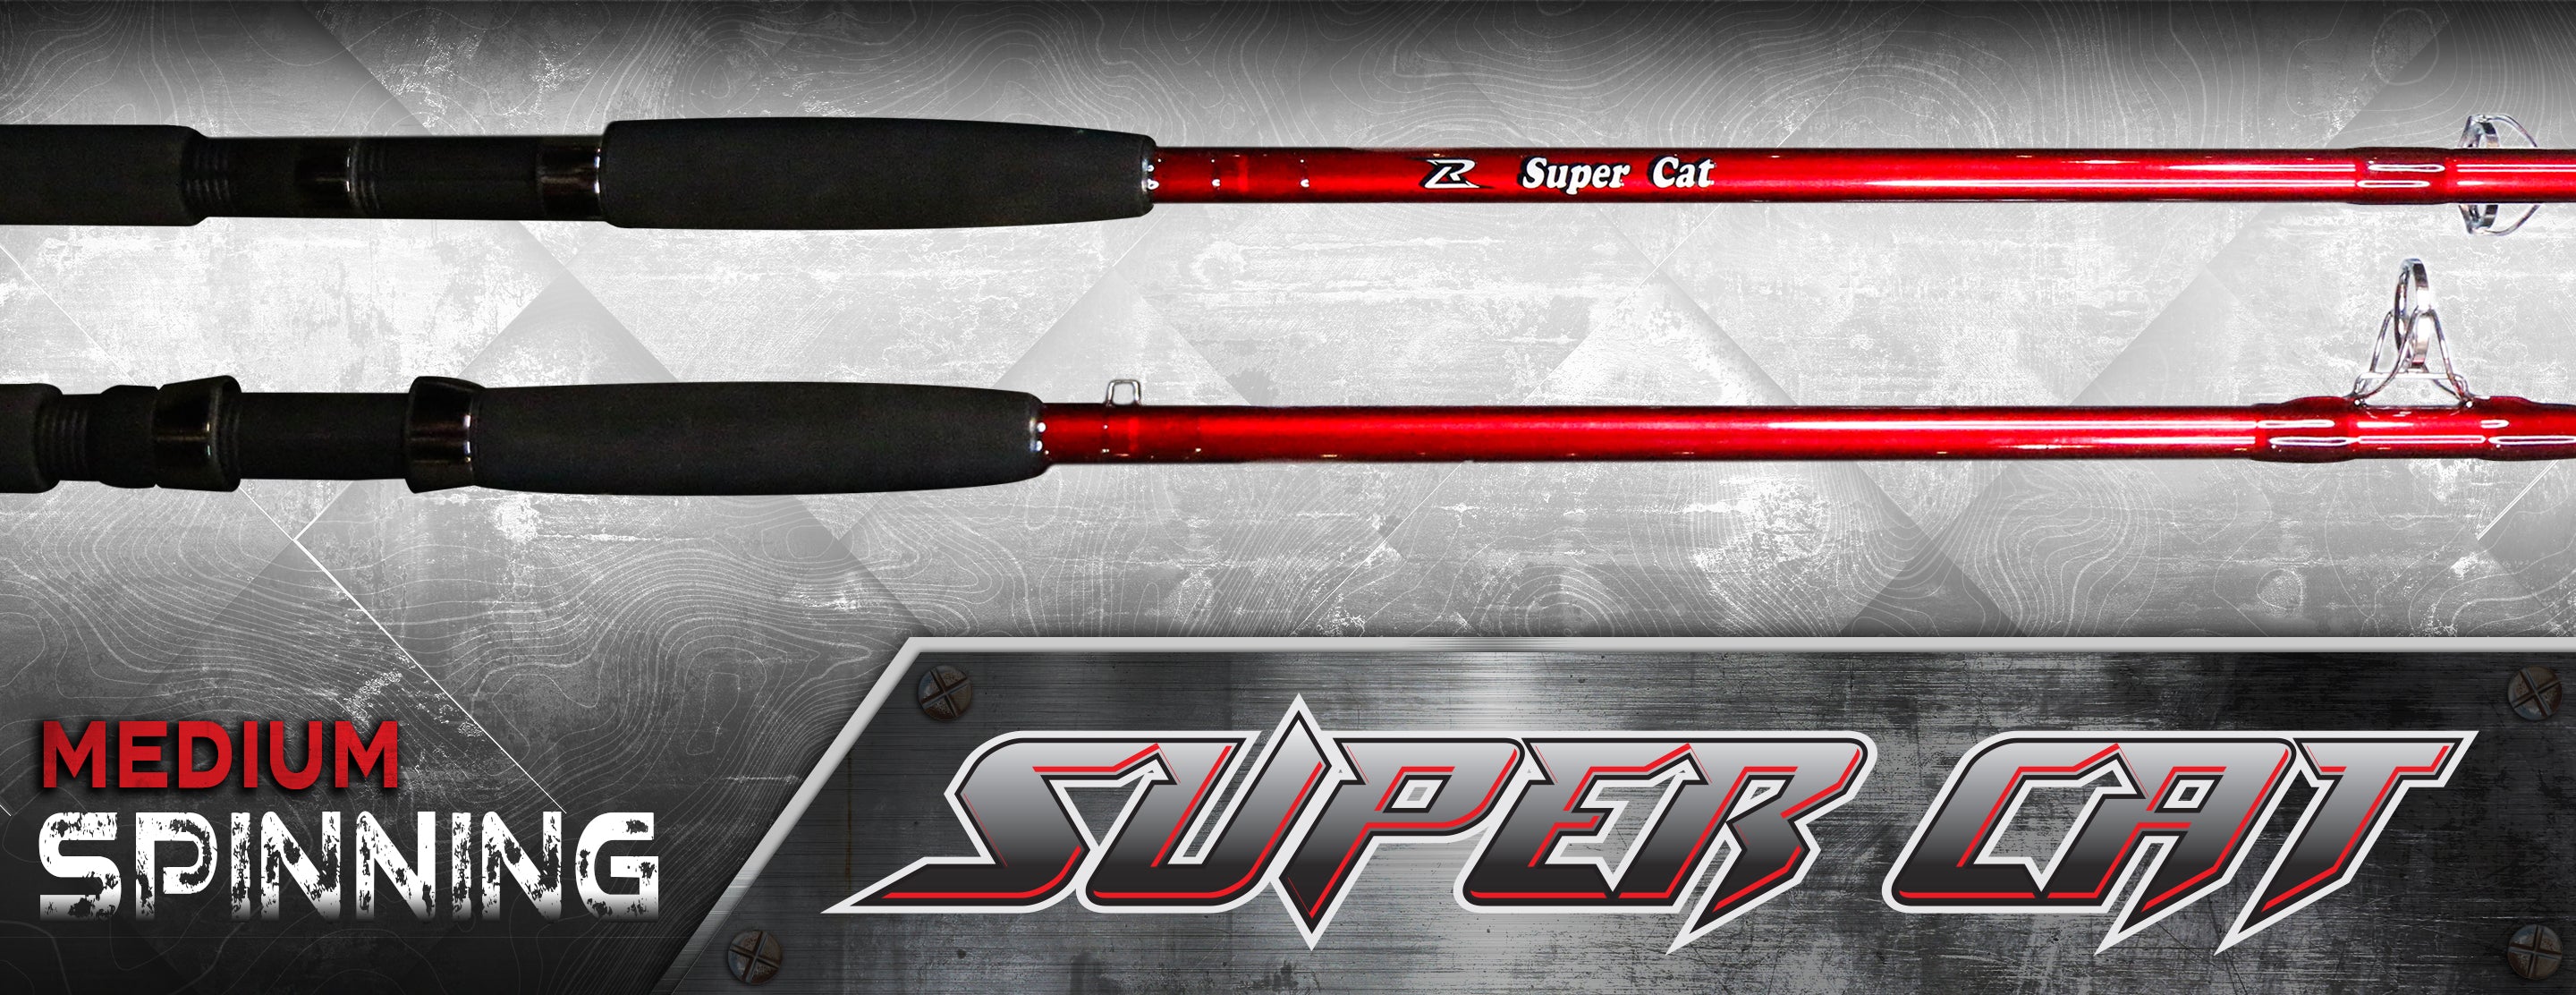 Super Cat Legacy - Medium Spinning – Rippin Lips Products